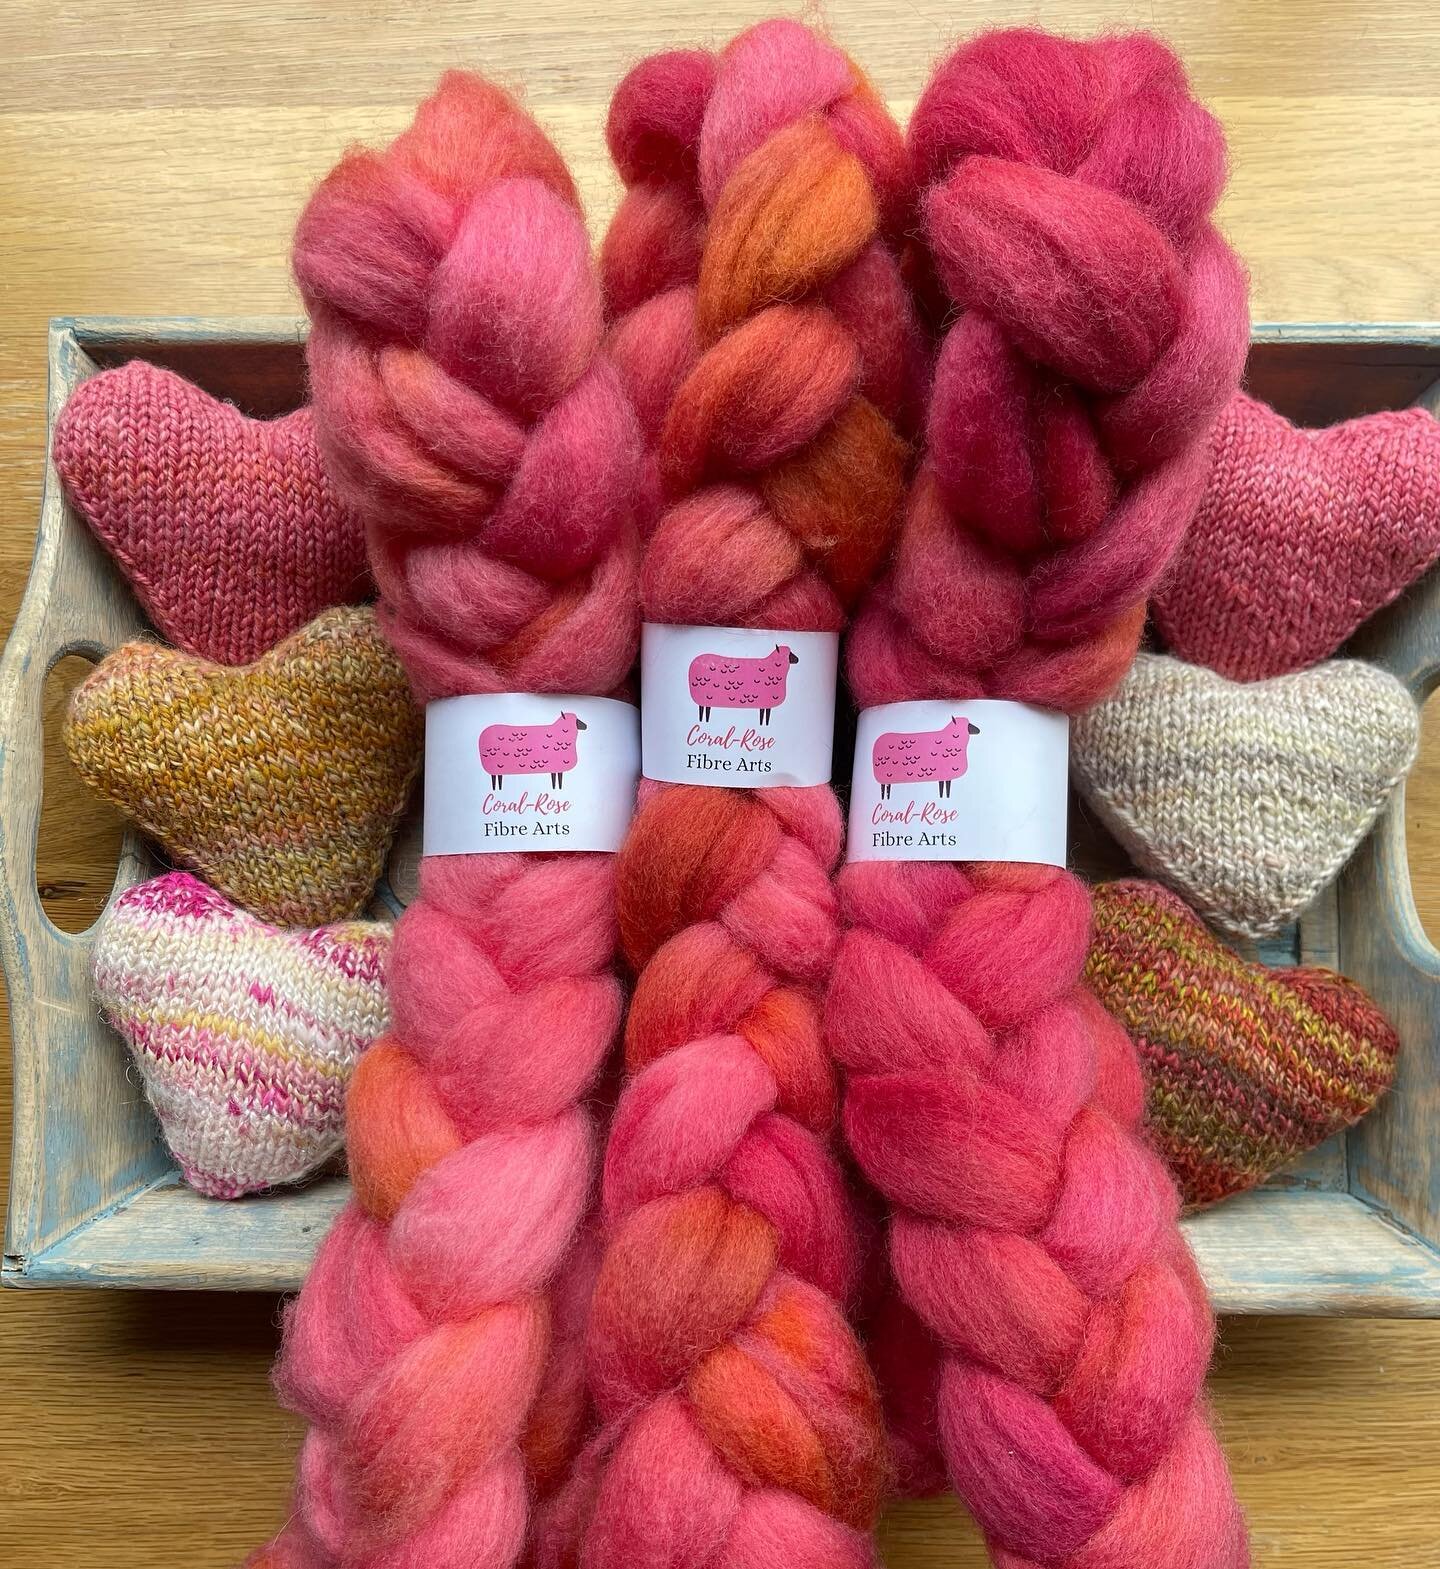 Some new fibre!  Lovely Shetland in my &lsquo;Coral-Rose&rsquo; colourway. 

Use code &lsquo;tdf2022&rsquo; for 15% off!!
 

#handspinning #handspun #handspunyarn #spinstagram #knitstagram #spinningfiber #spinningaddict #spinnersofig #spinners #spinn